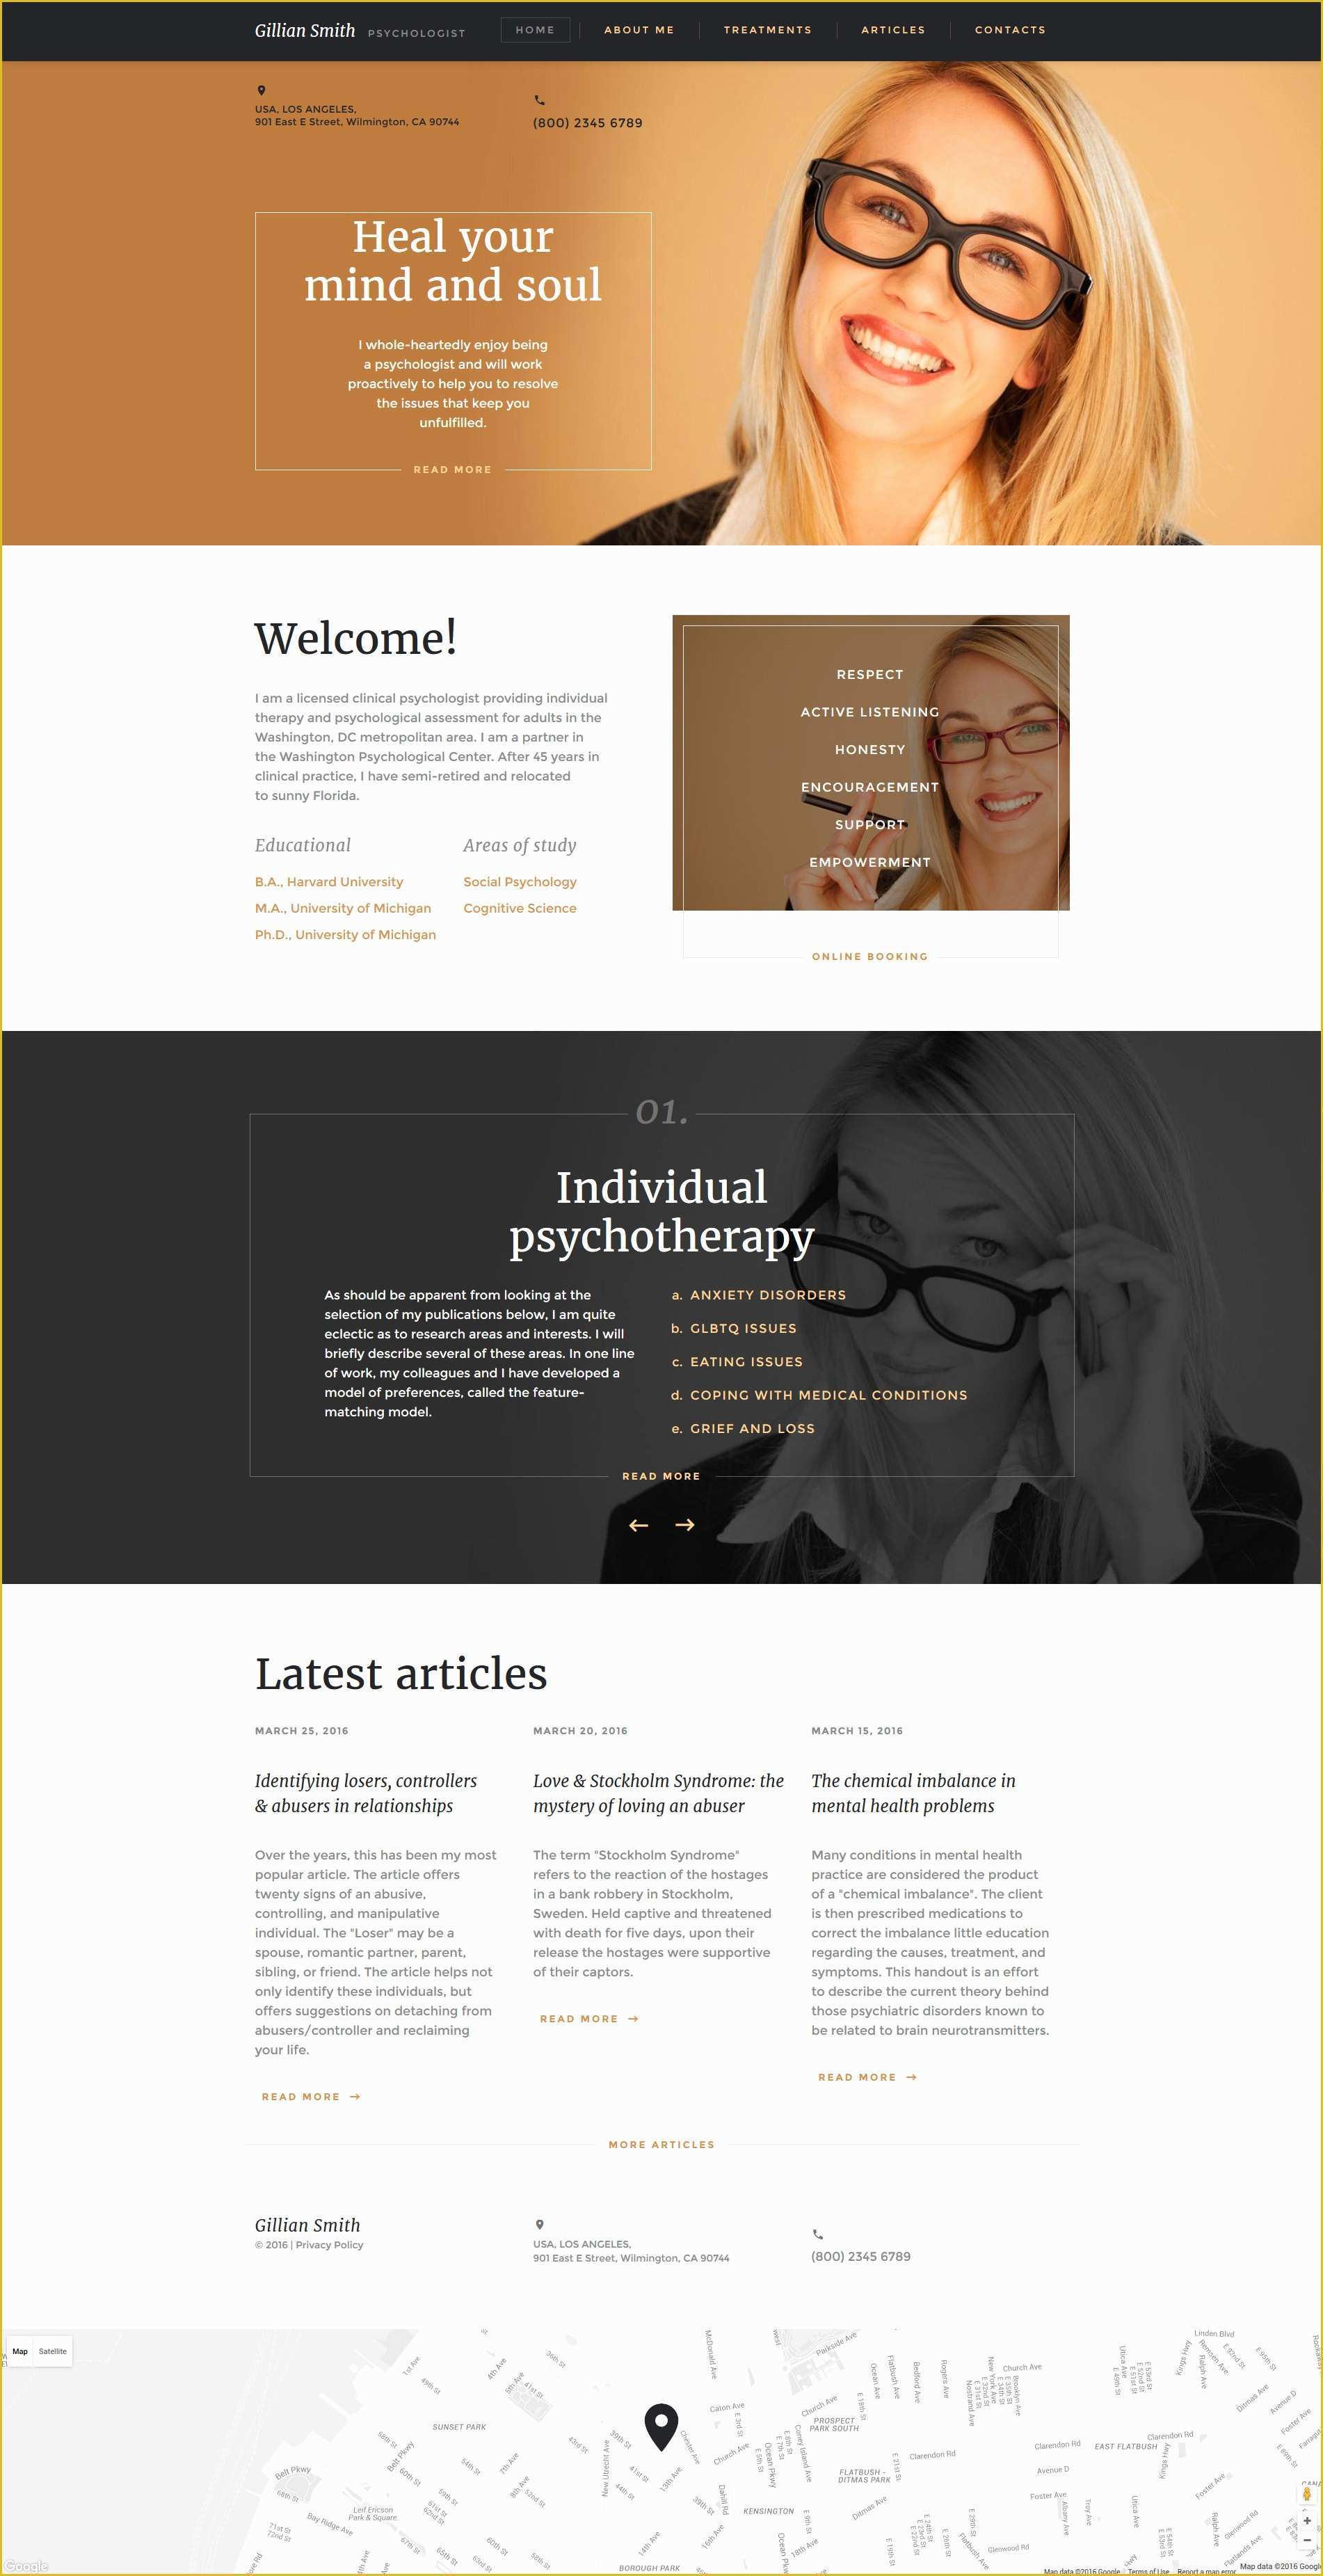 Psychologist Website Template Free Of Psychologist Website Template